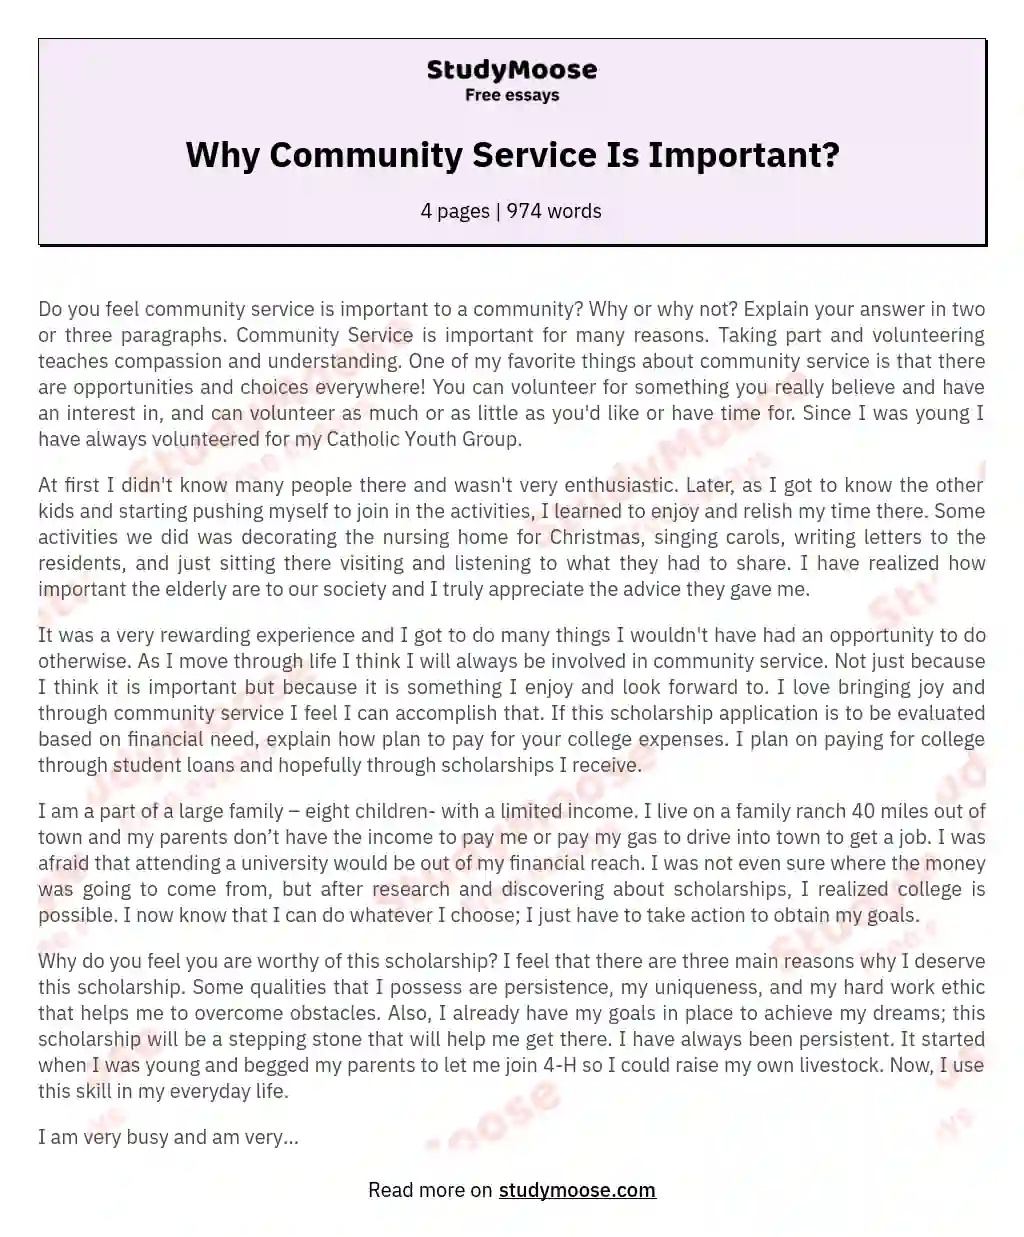 Why Community Service Is Important? essay